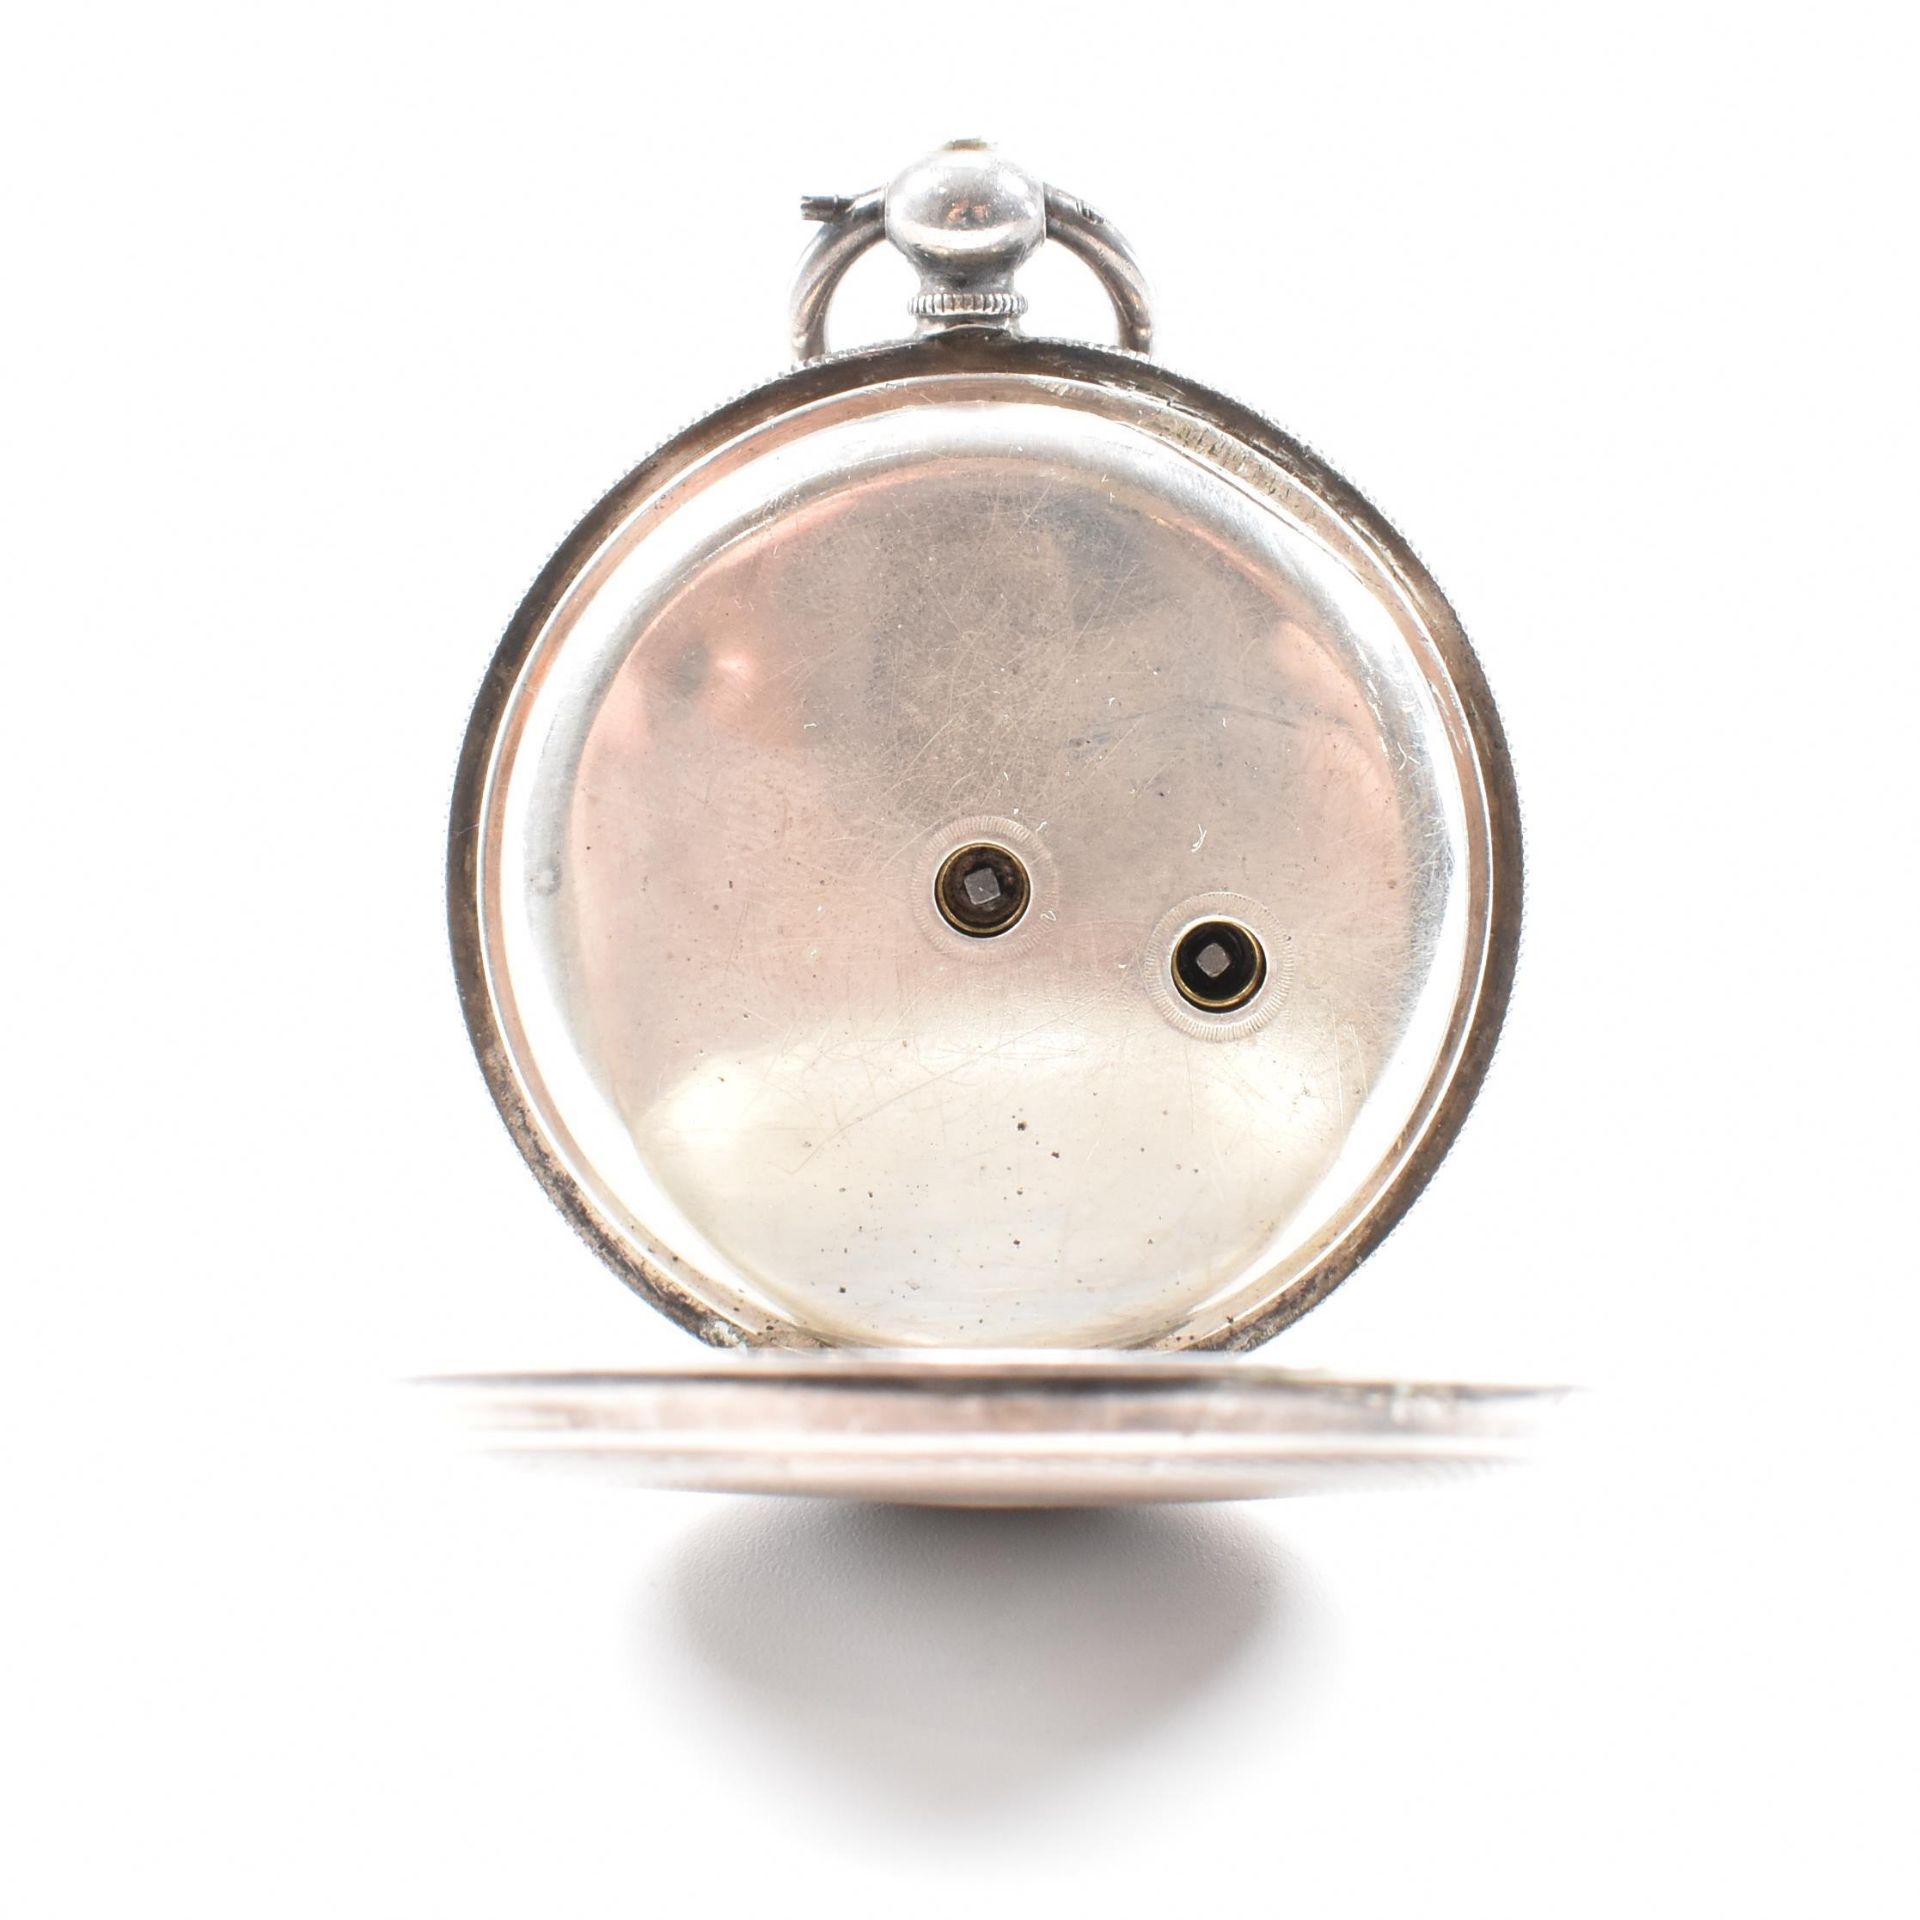 ANTIQUE SWISS SILVER FULL HUNTER POCKET WATCH - Image 5 of 8